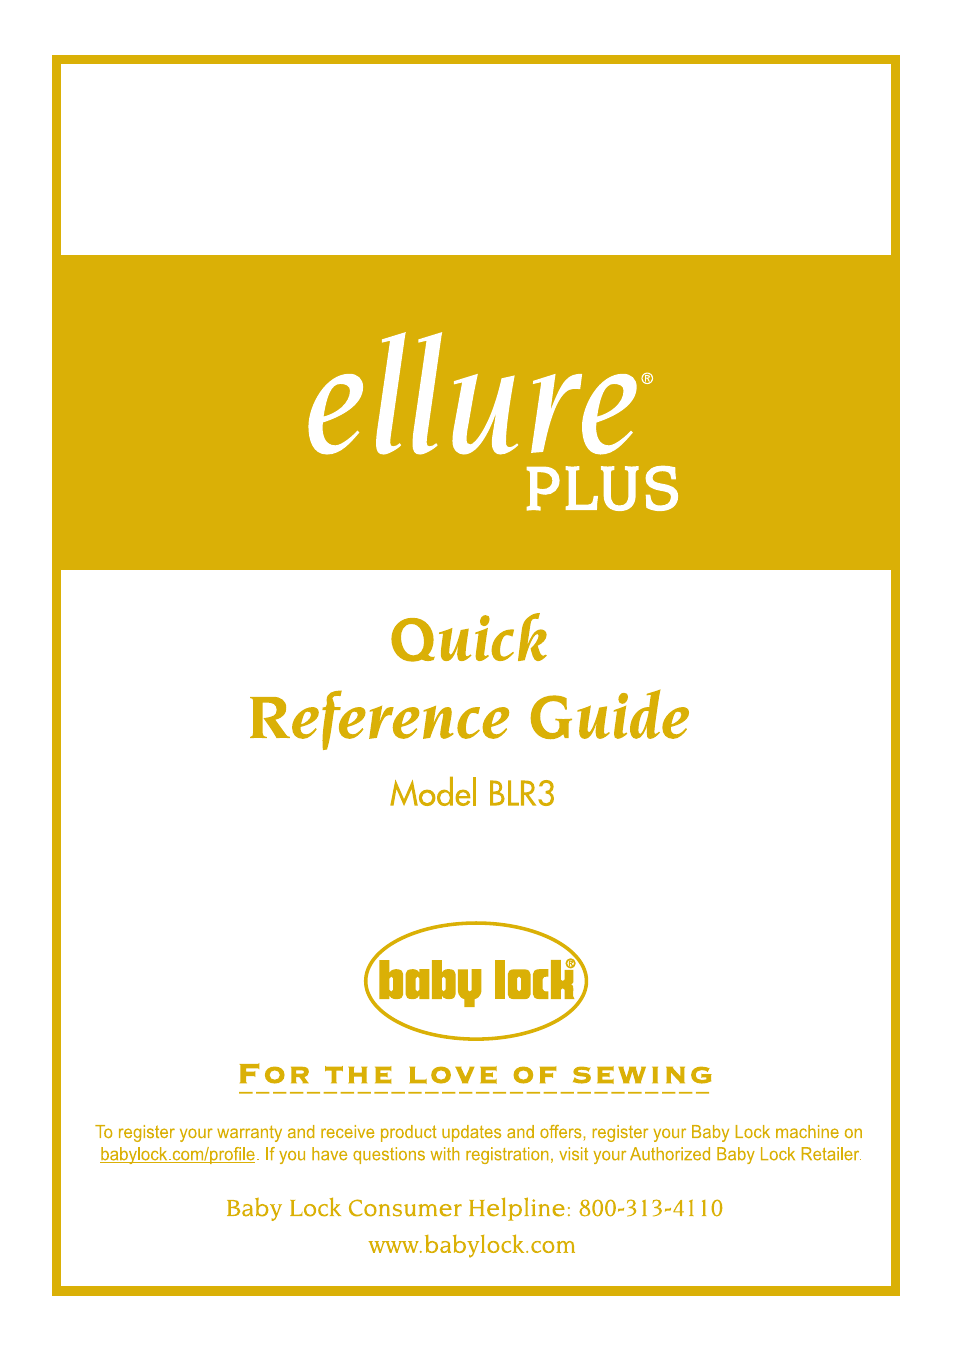 Ellure Plus (BLR3) Quick Reference Guide